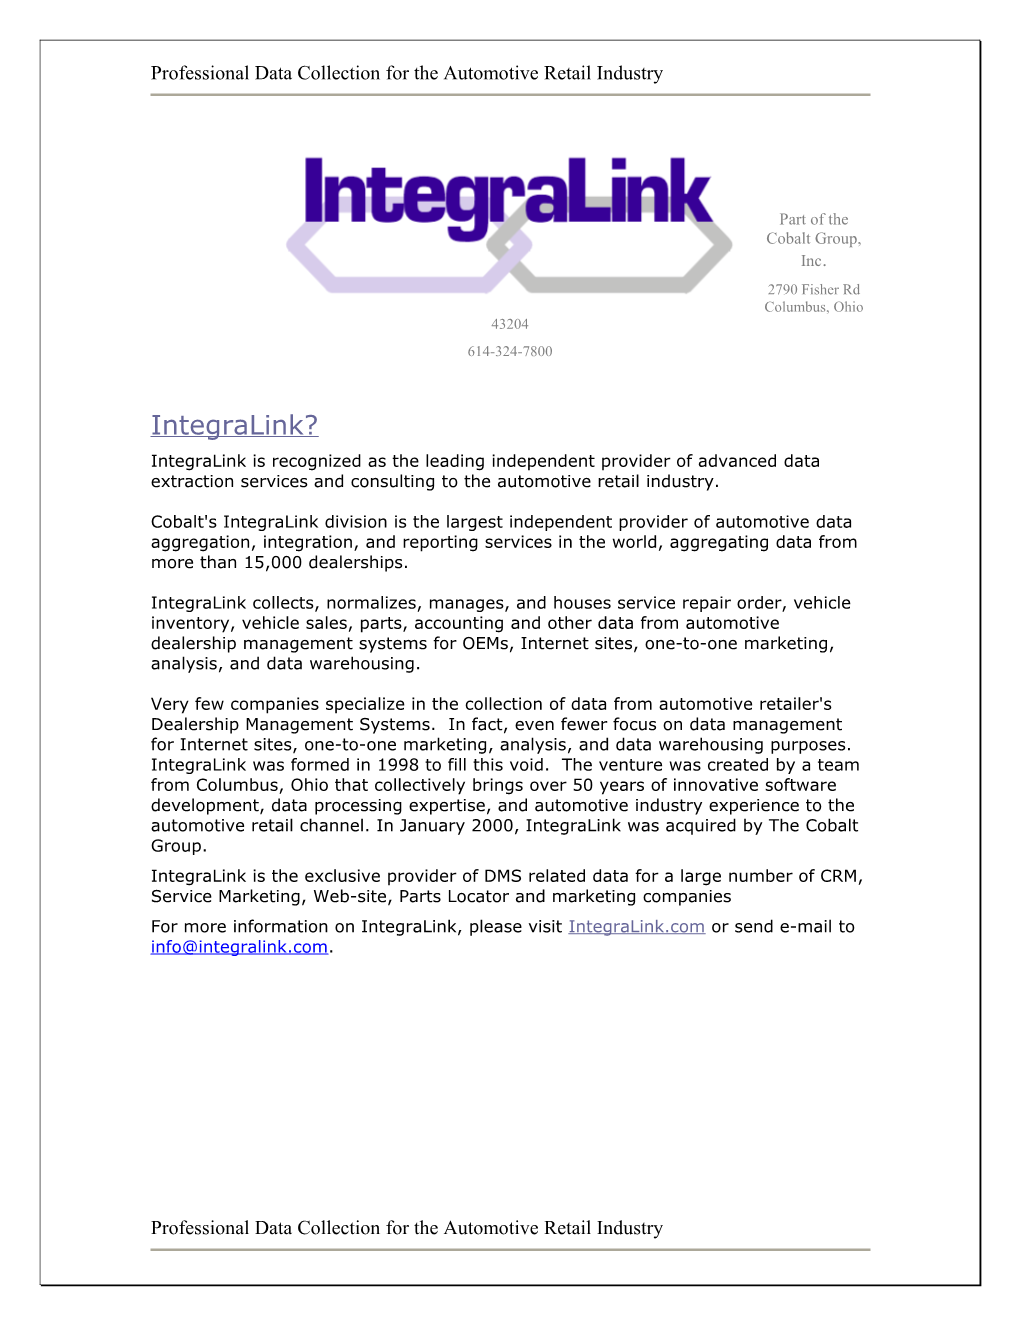 Cobalt's Integralink Division Is the Largest Provider of Automotive Data Aggregation